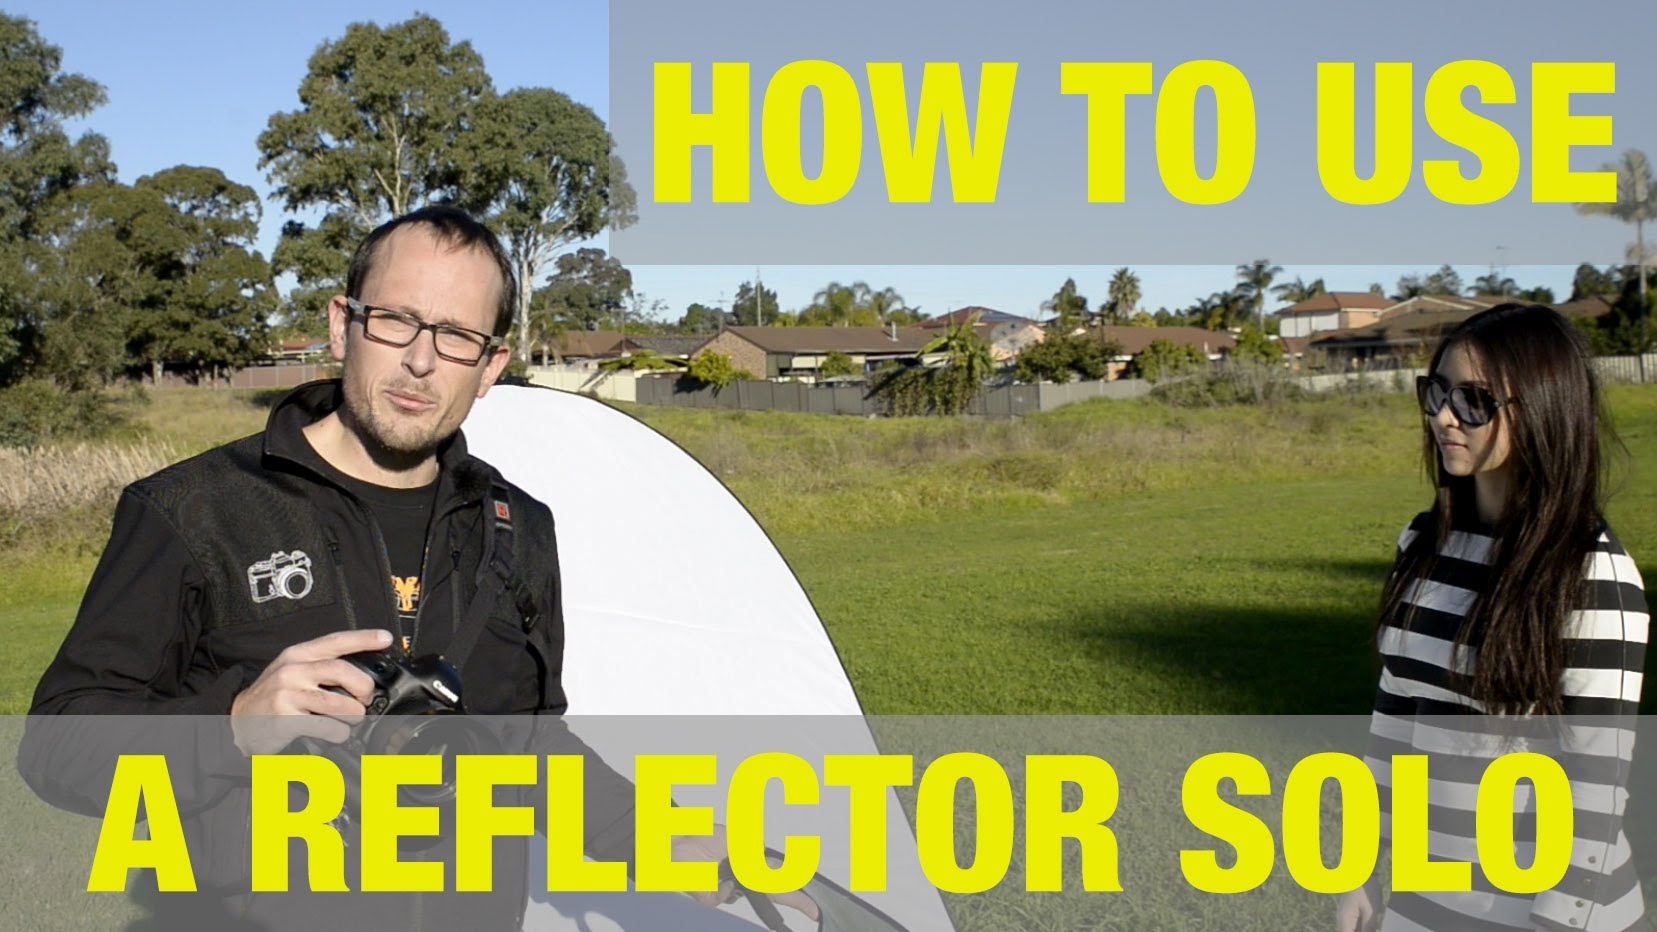 The Video Shows the Difference That a Reflector Can Make